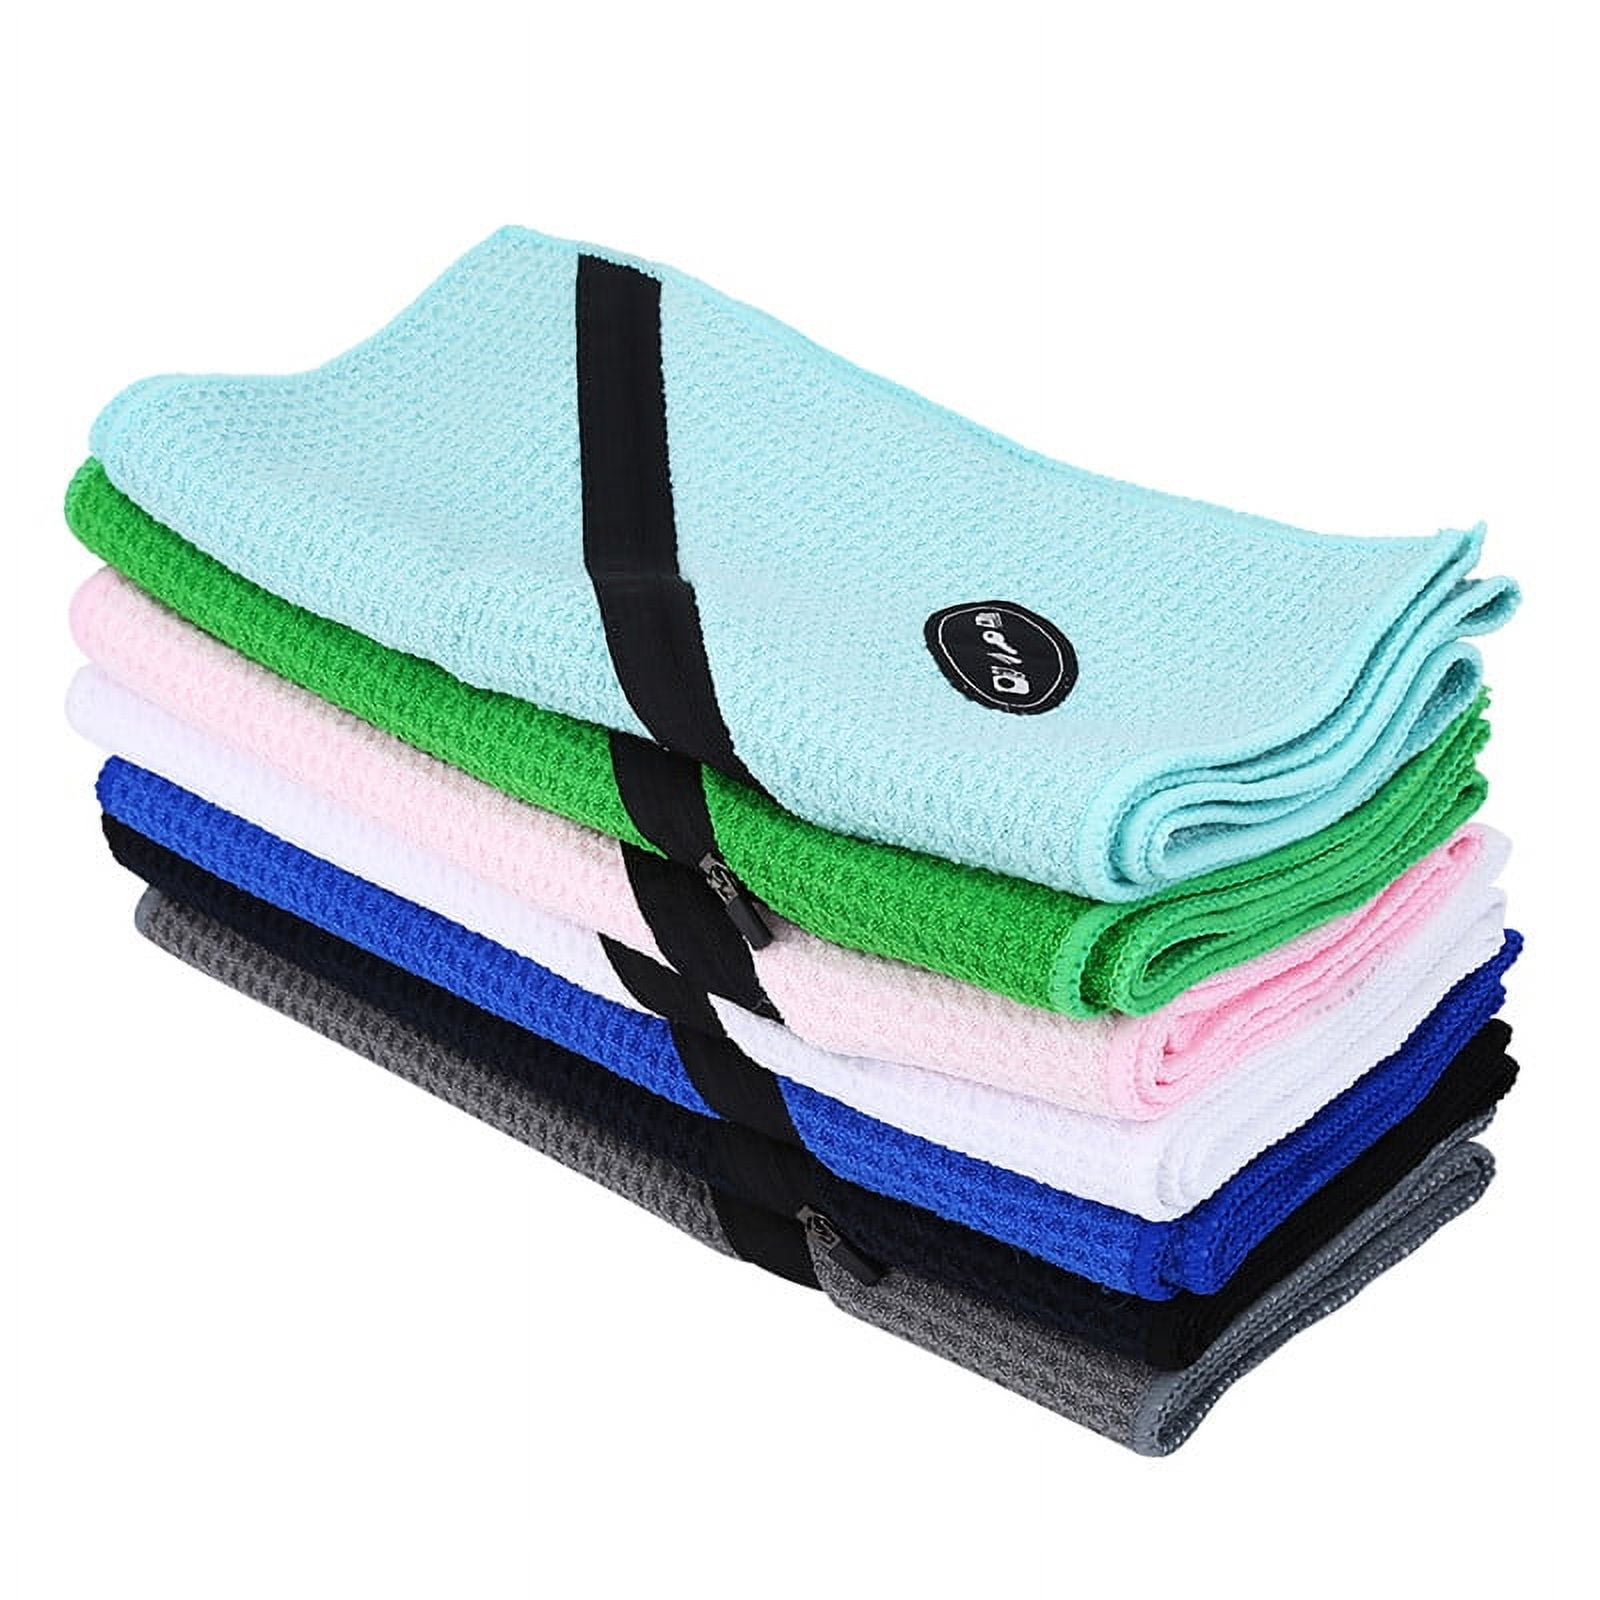 WALFRONT Microfiber Sports Towel Soft Lightweight Sweat Towels Gym Workout  Towels with Zippered Pocket for Yoga,Travel,Swim,Hiking and Camping 